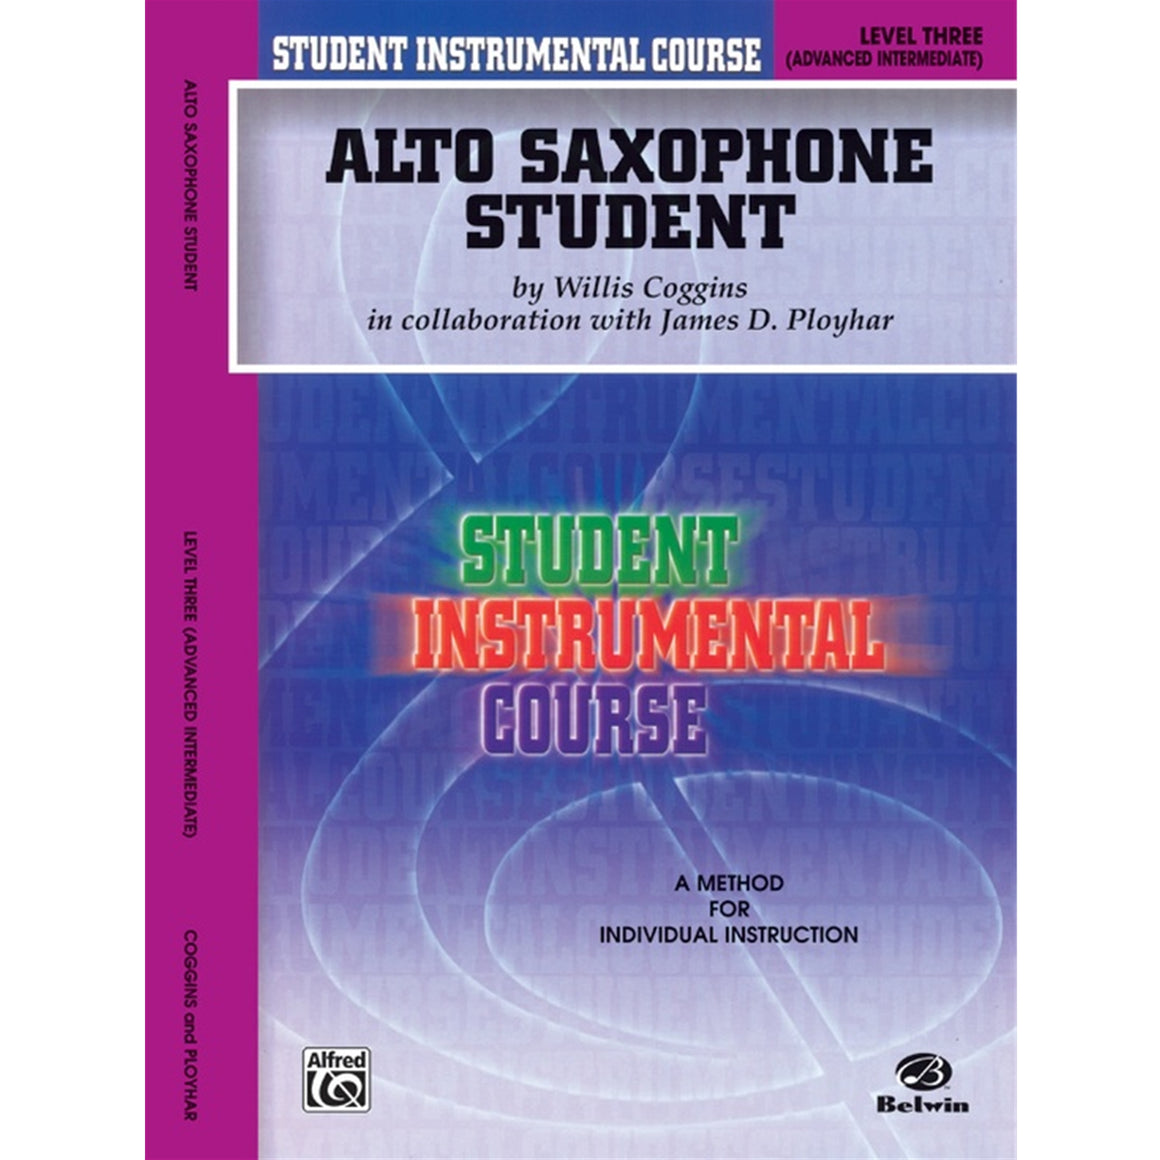 ALFRED 00BIC00331A Student Instrumental Course: Alto Saxophone Student, Level III [Saxophone]